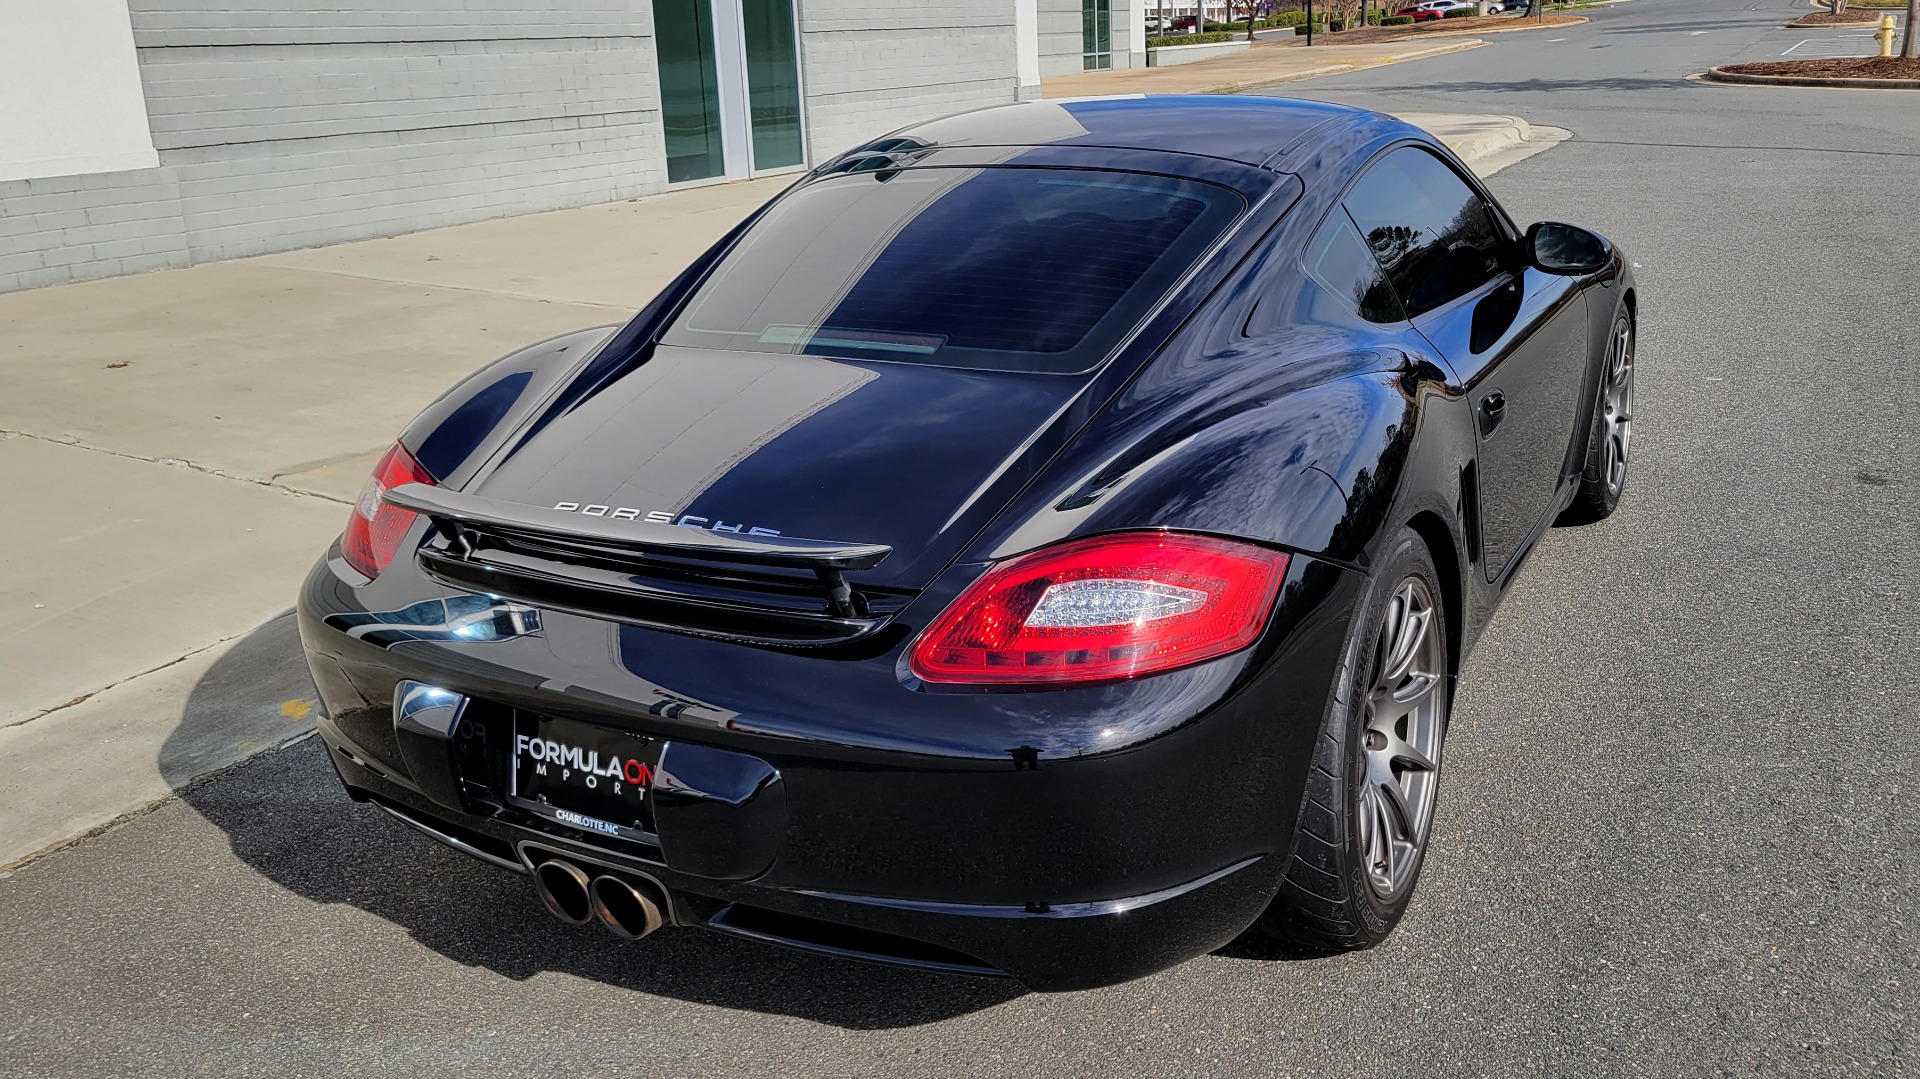 Used 2007 Porsche CAYMAN COUPE 2.7L / 5-SPD MANUAL / HTD STS / AIR COND / JL AUDIO / BORLA EXH for sale $25,999 at Formula Imports in Charlotte NC 28227 12